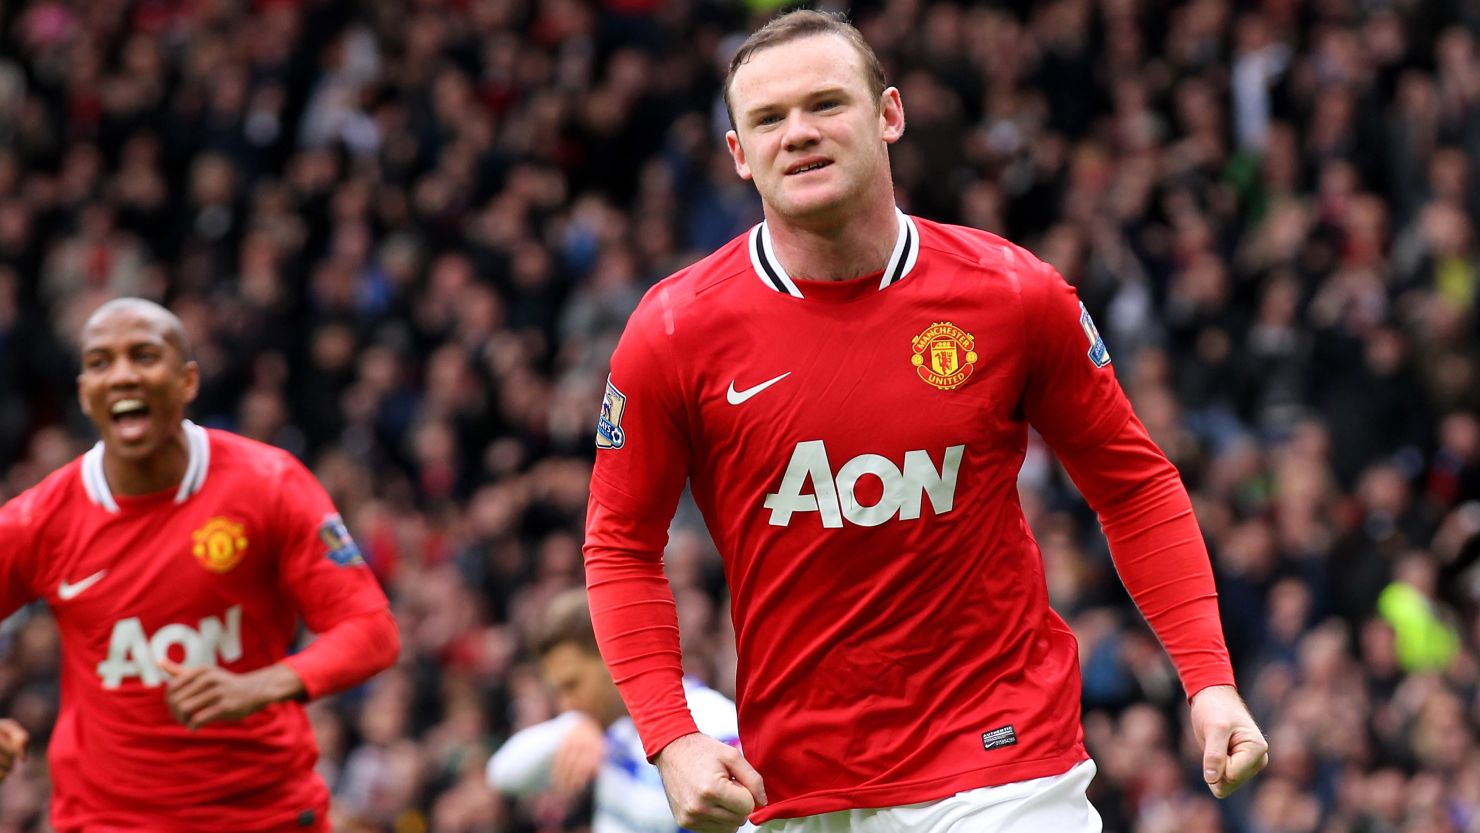 Wayne Rooney celebrates scoring in Manchester United's 2-0 win over QPR at Old Trafford.